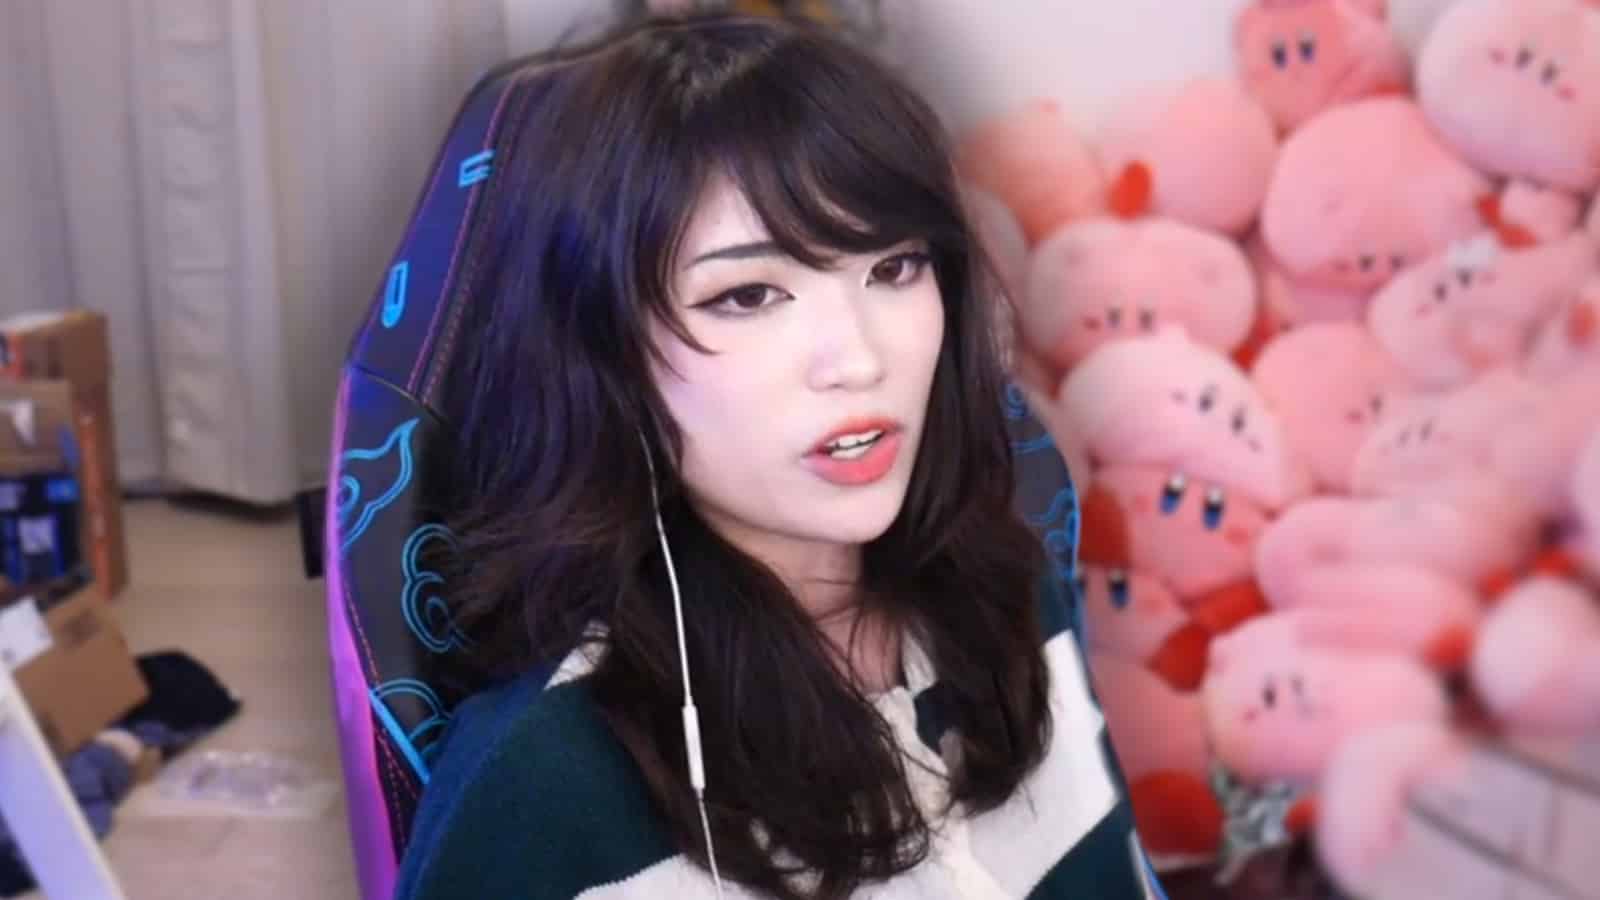 emiru-open-up-on-mental-issues-after-twitch-fans-raise-concerns-over-symptoms